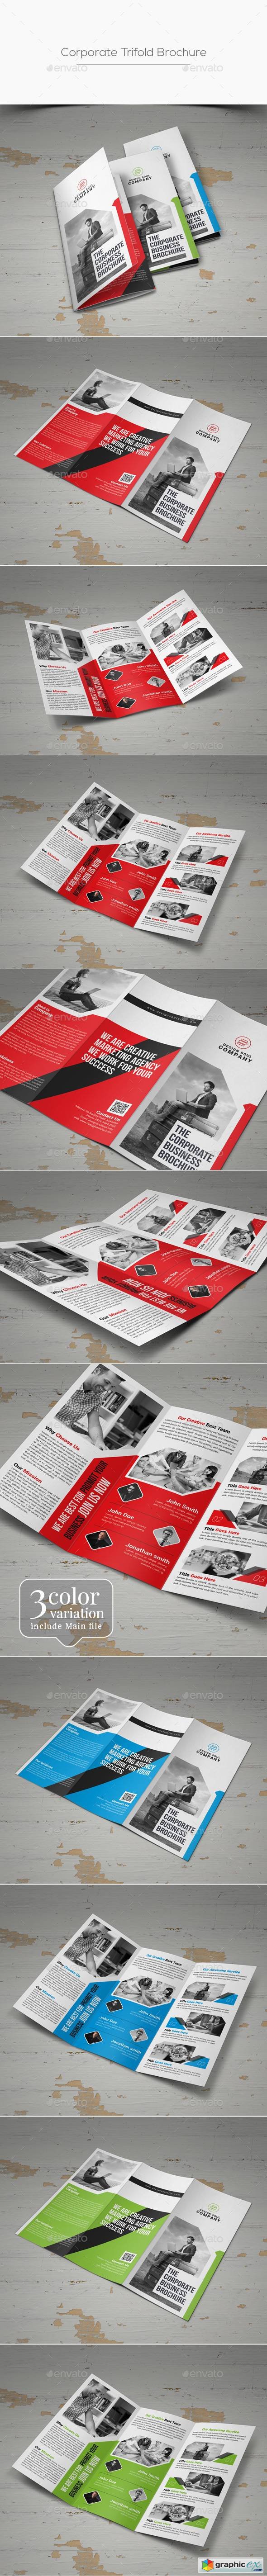 Trifold Brochure 19445992